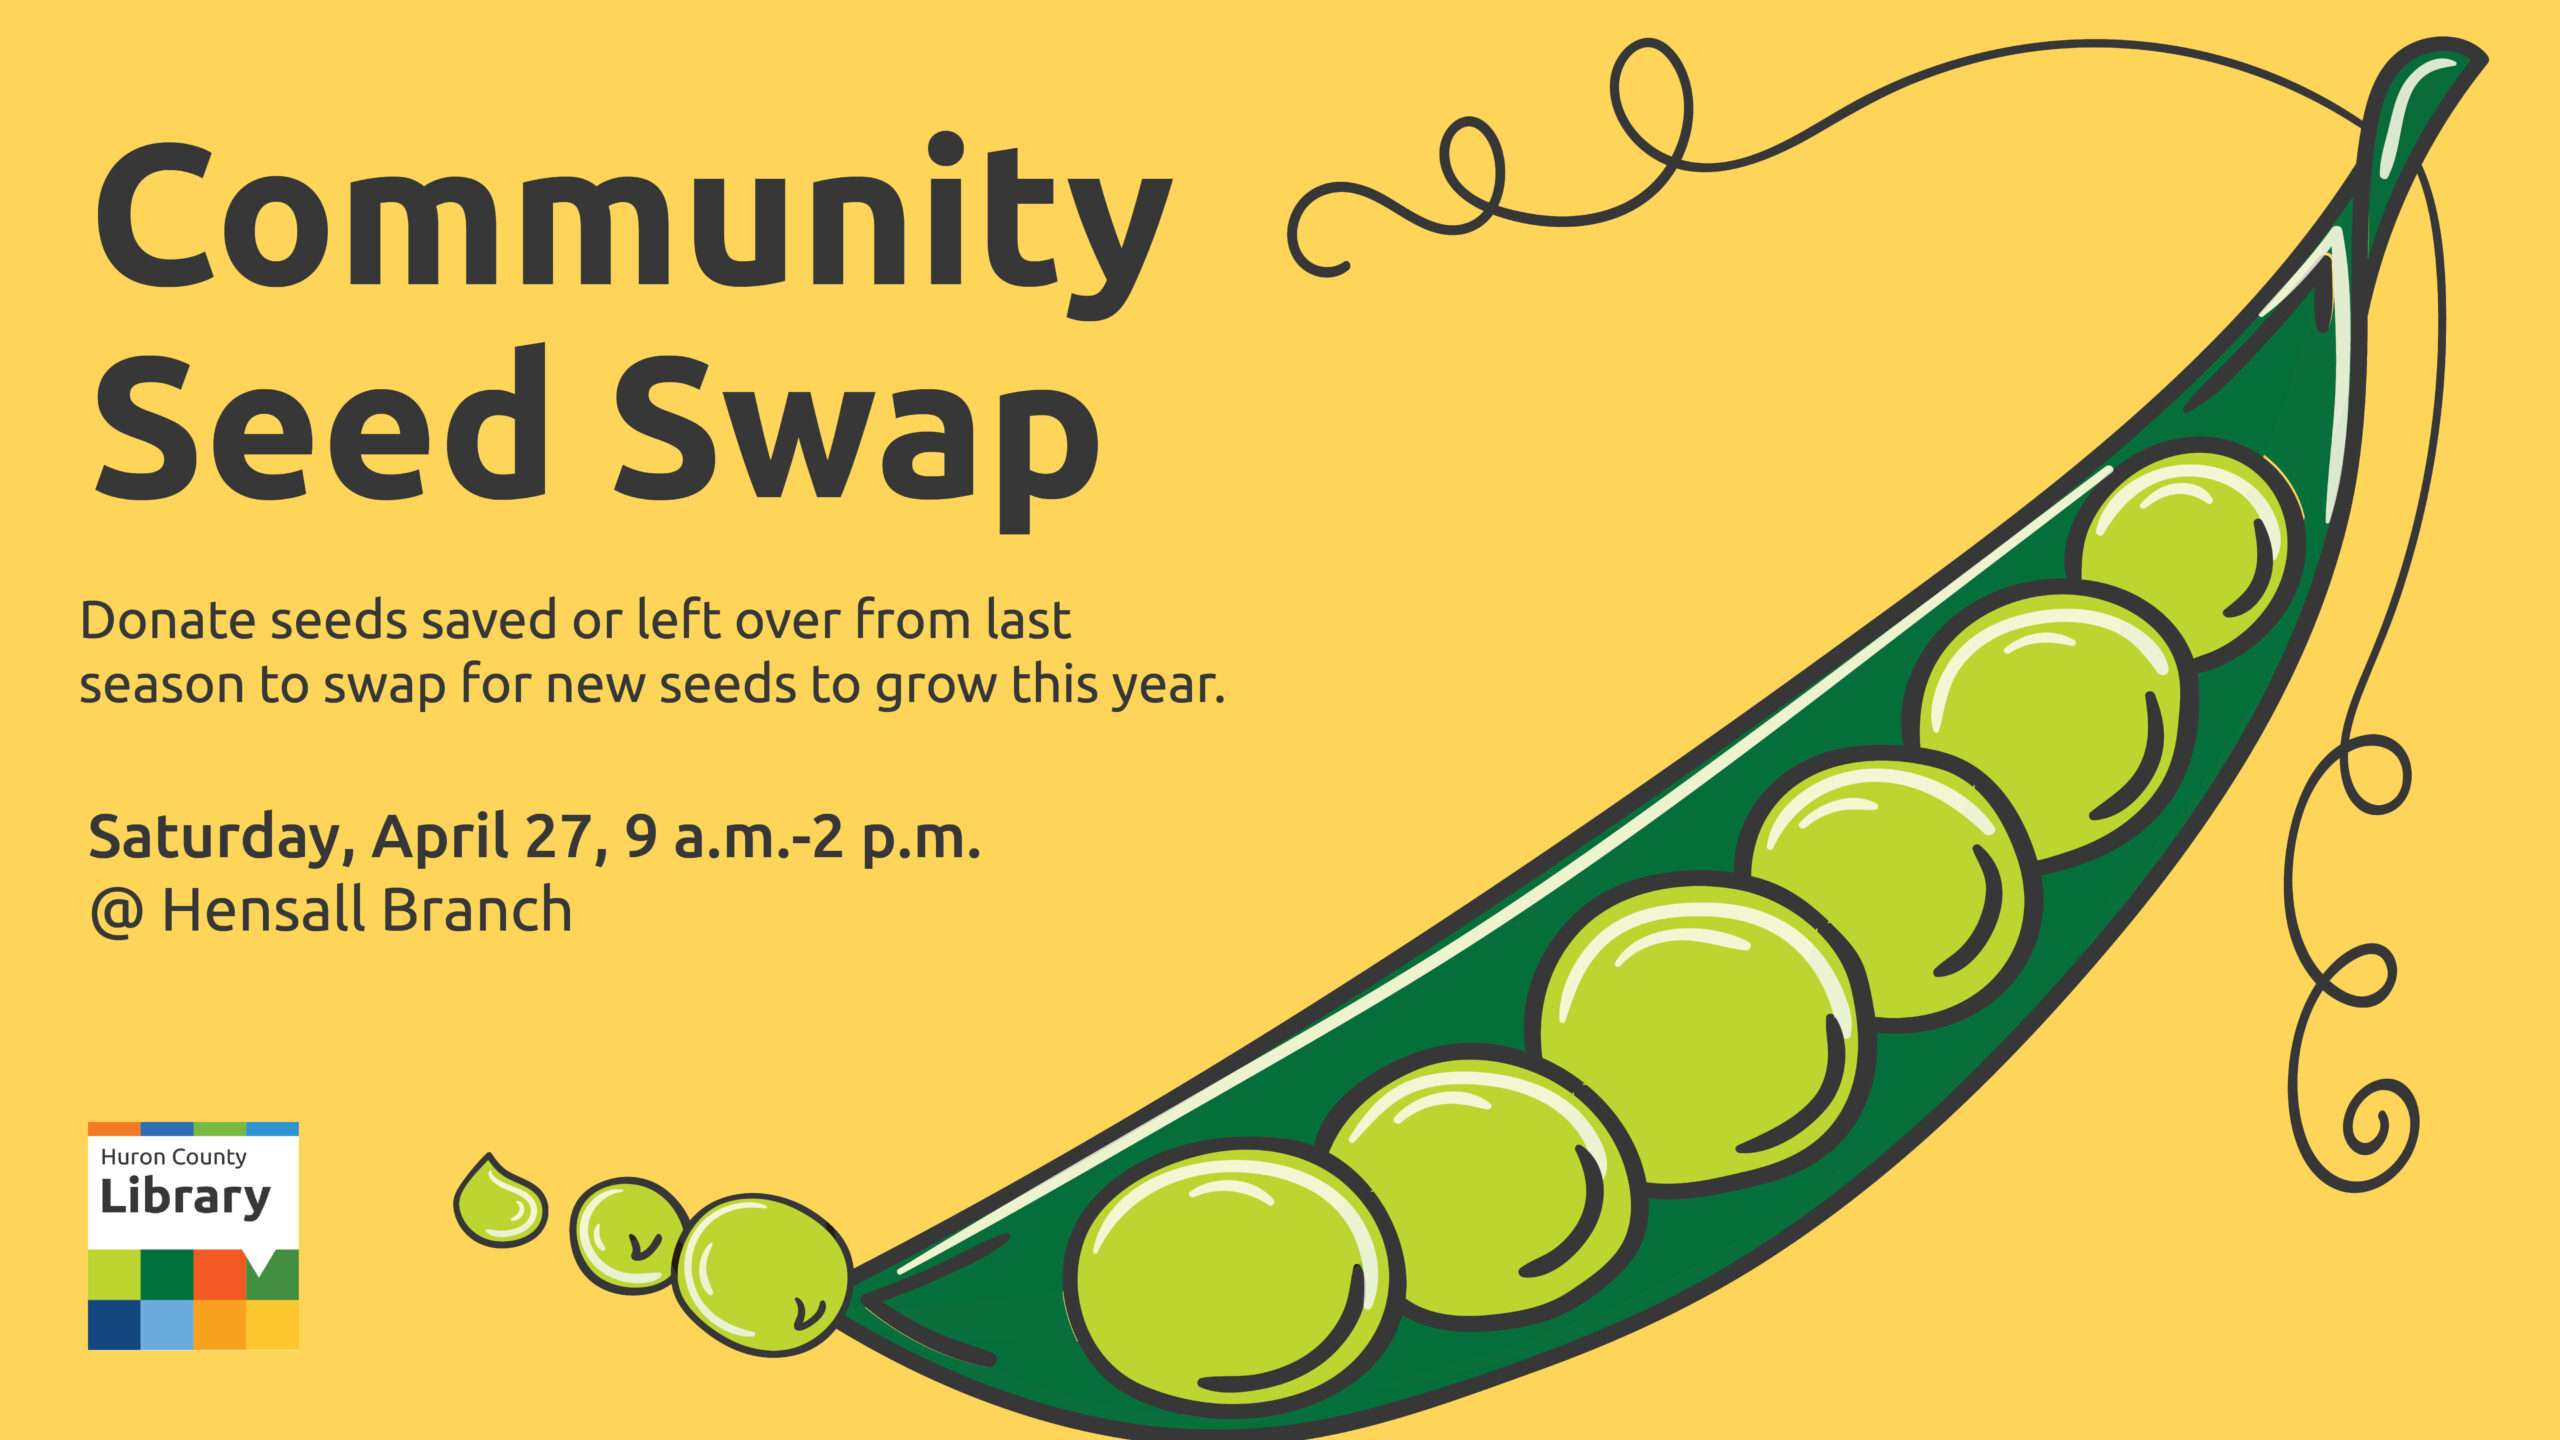 Illustration of peas in a pod with text promoting Community Seed Swap at Hensall